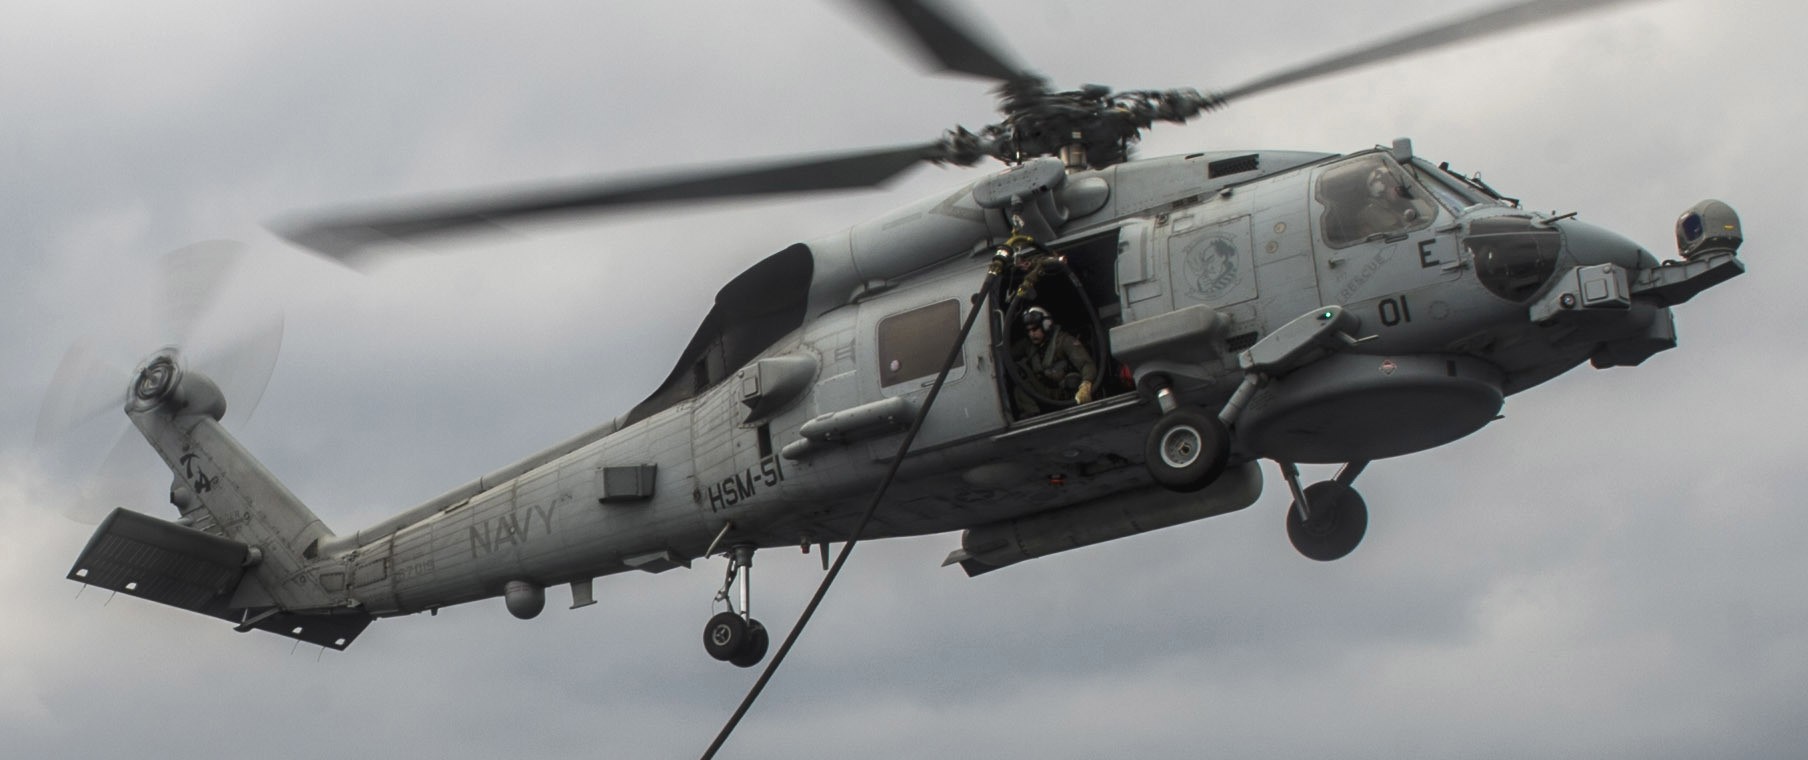 hsm-51 warlords helicopter maritime strike squadron mh-60r seahawk navy 2015 58